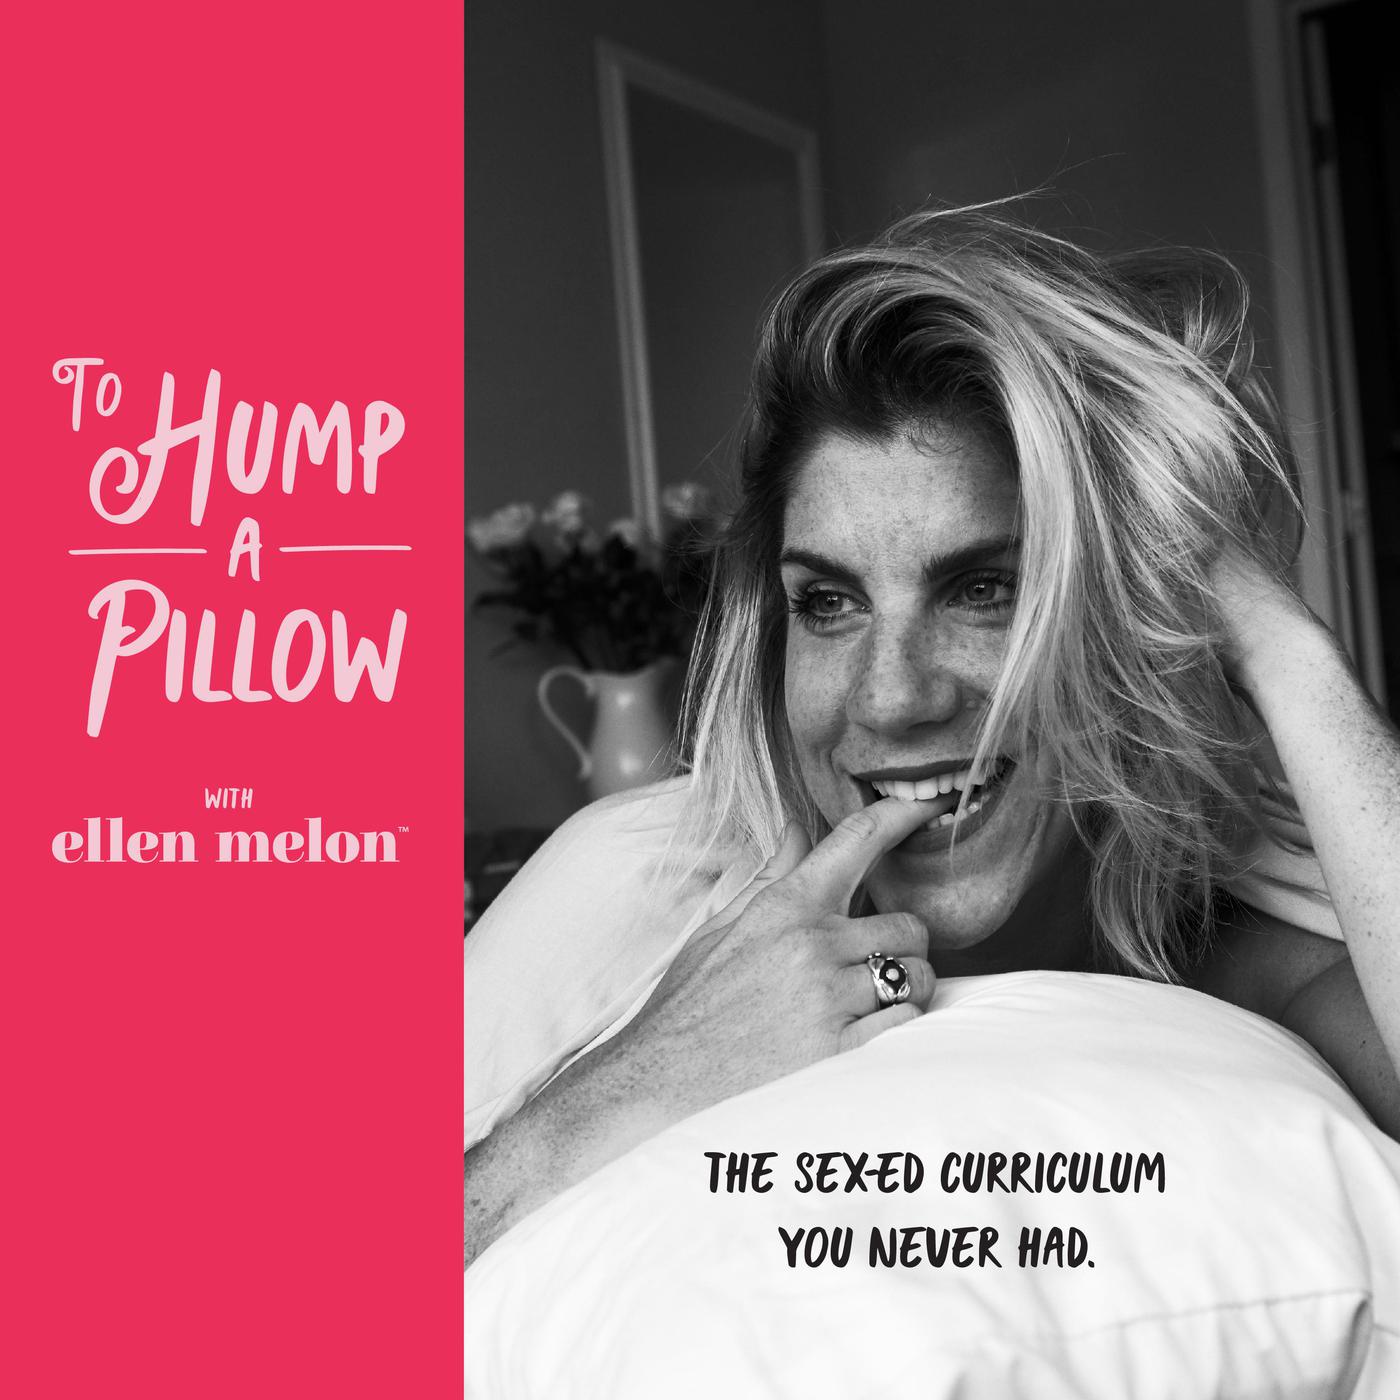 Best of How to hump a pillow for women